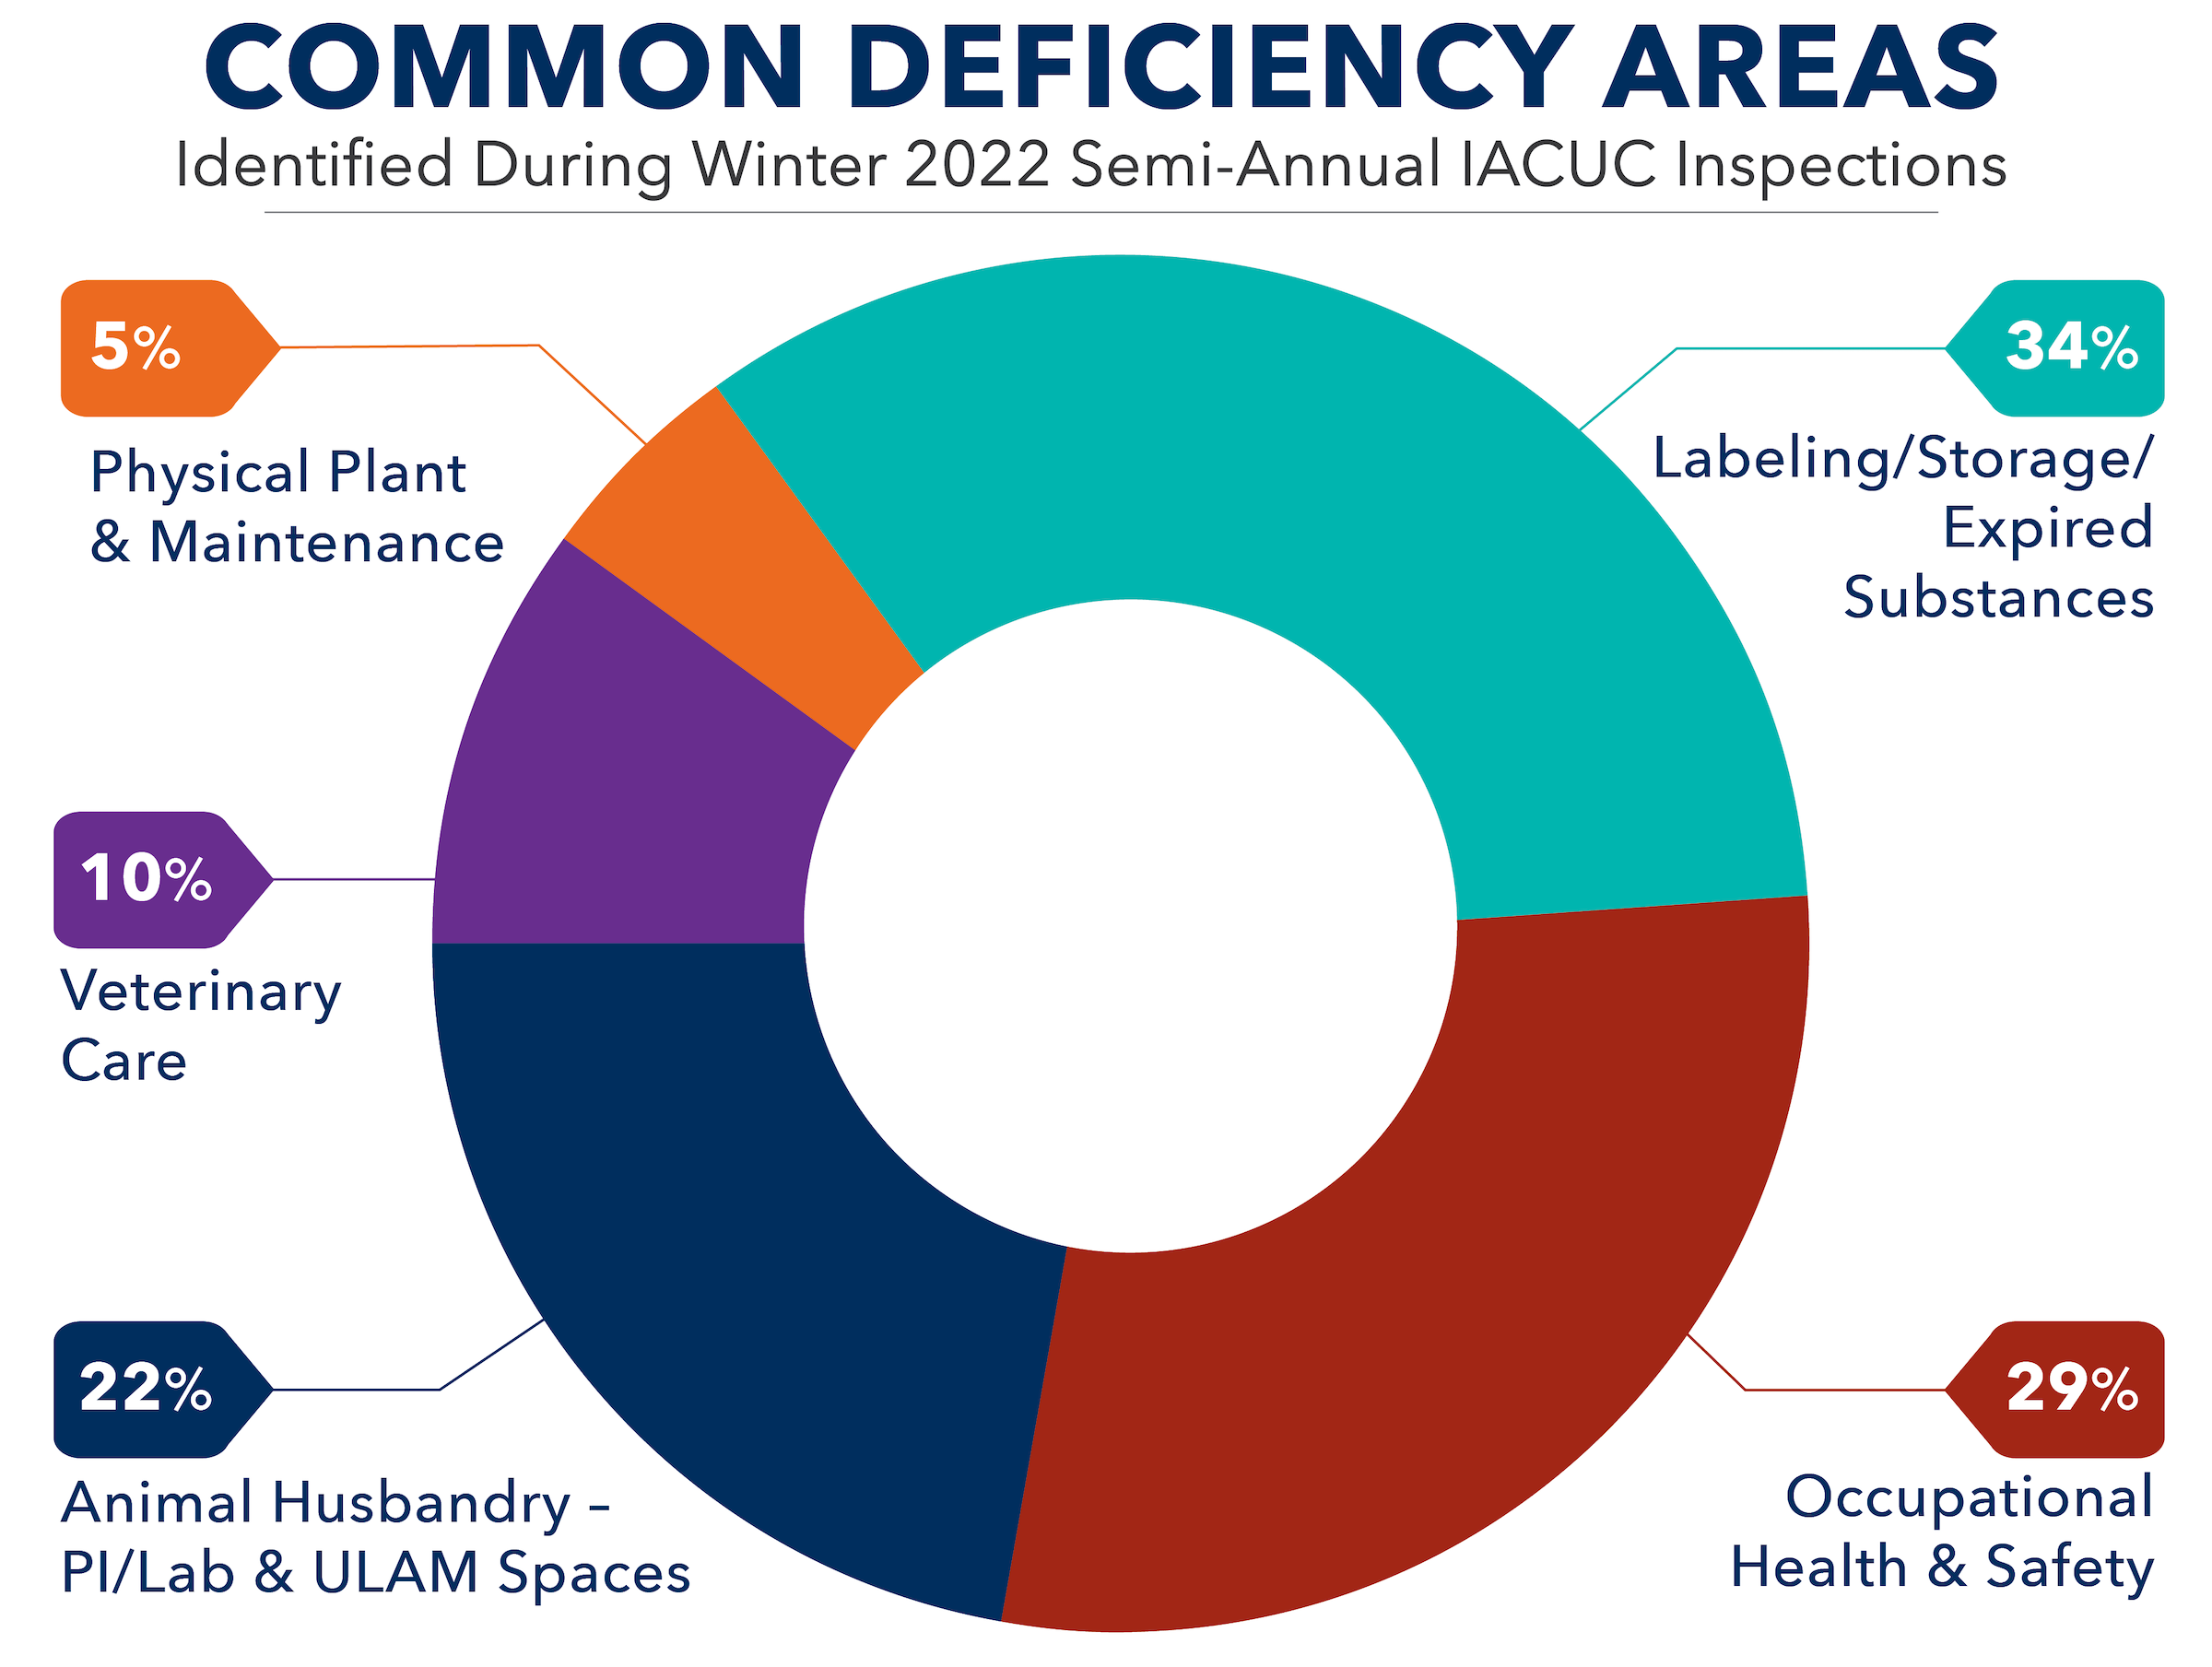 Multi-colored graph showing common deficiency areas identified during Winter 2022 semi-annual facility inspections